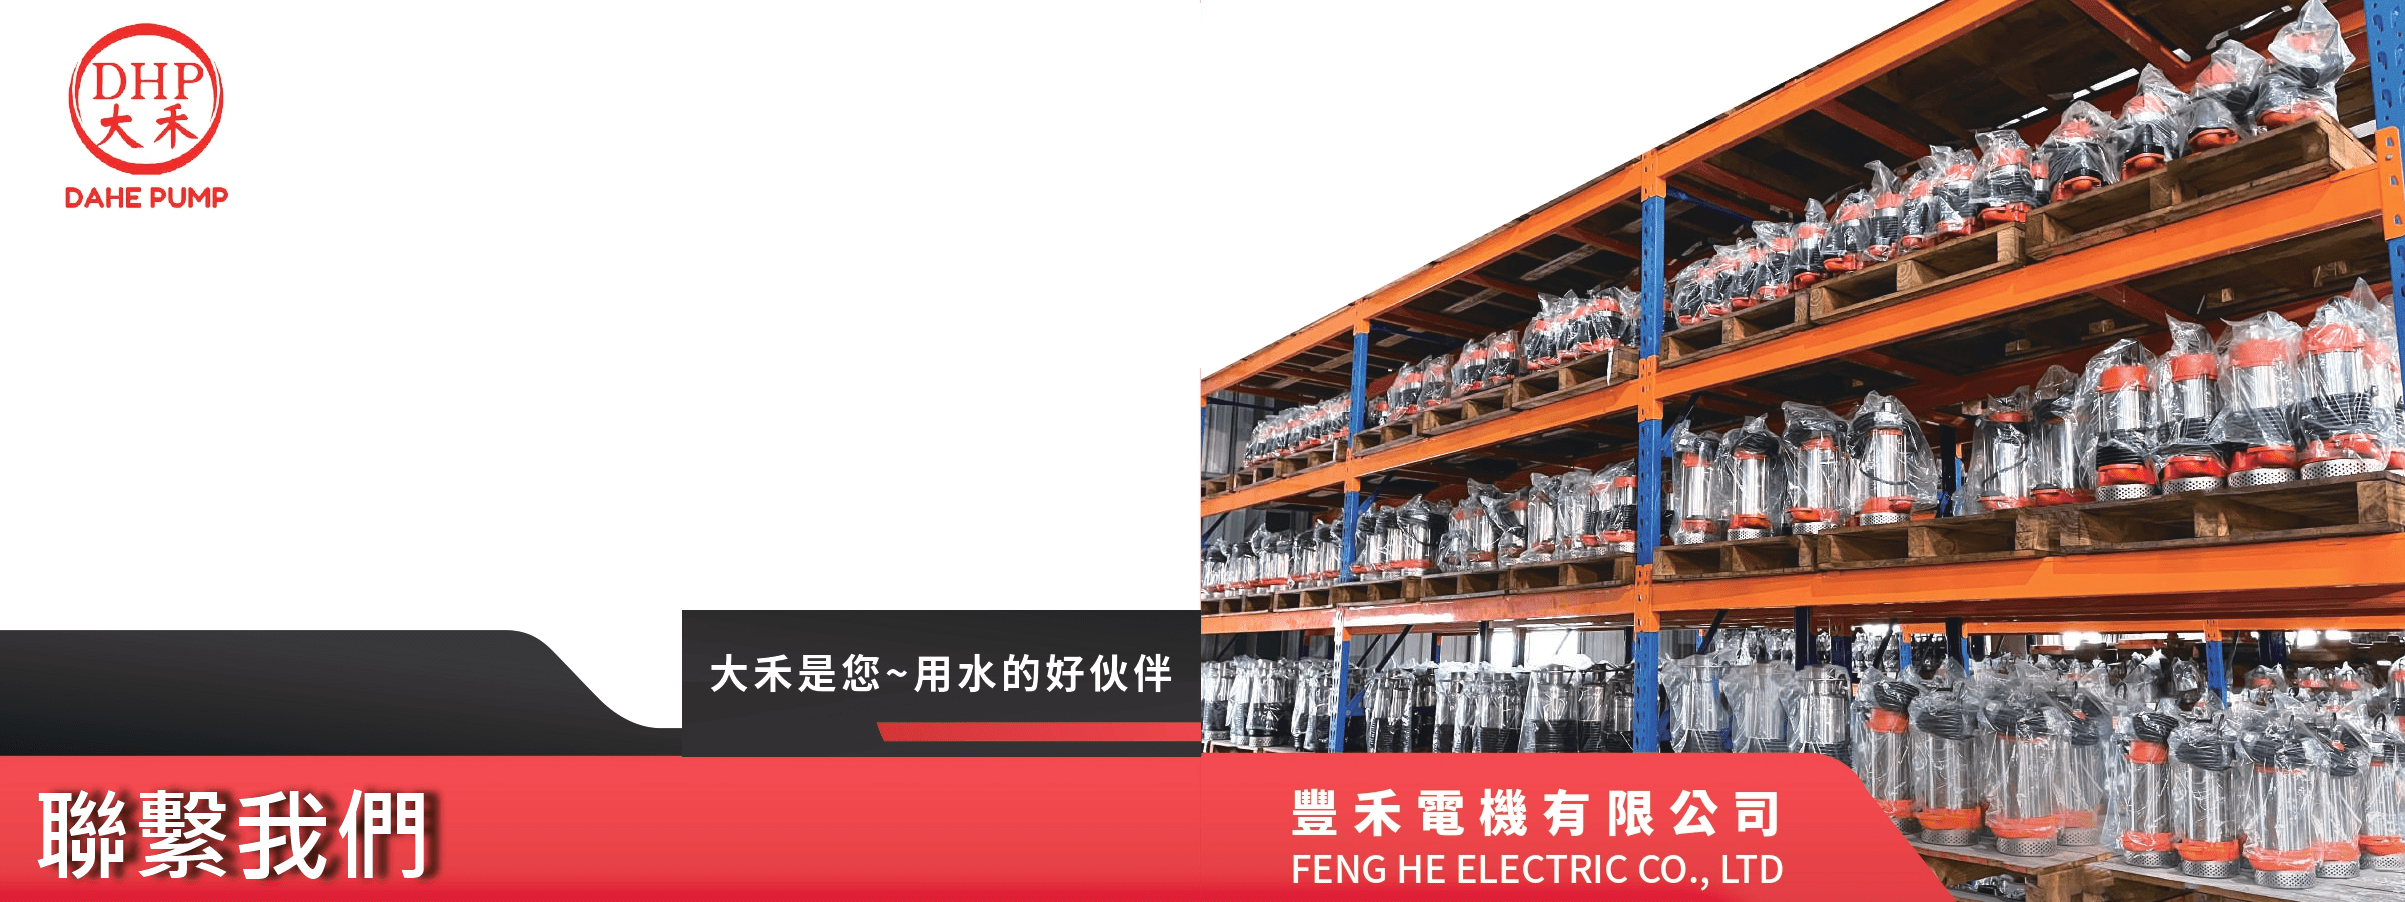 FENG HE ELECTRIC CO.,LTD.的 Banner pic